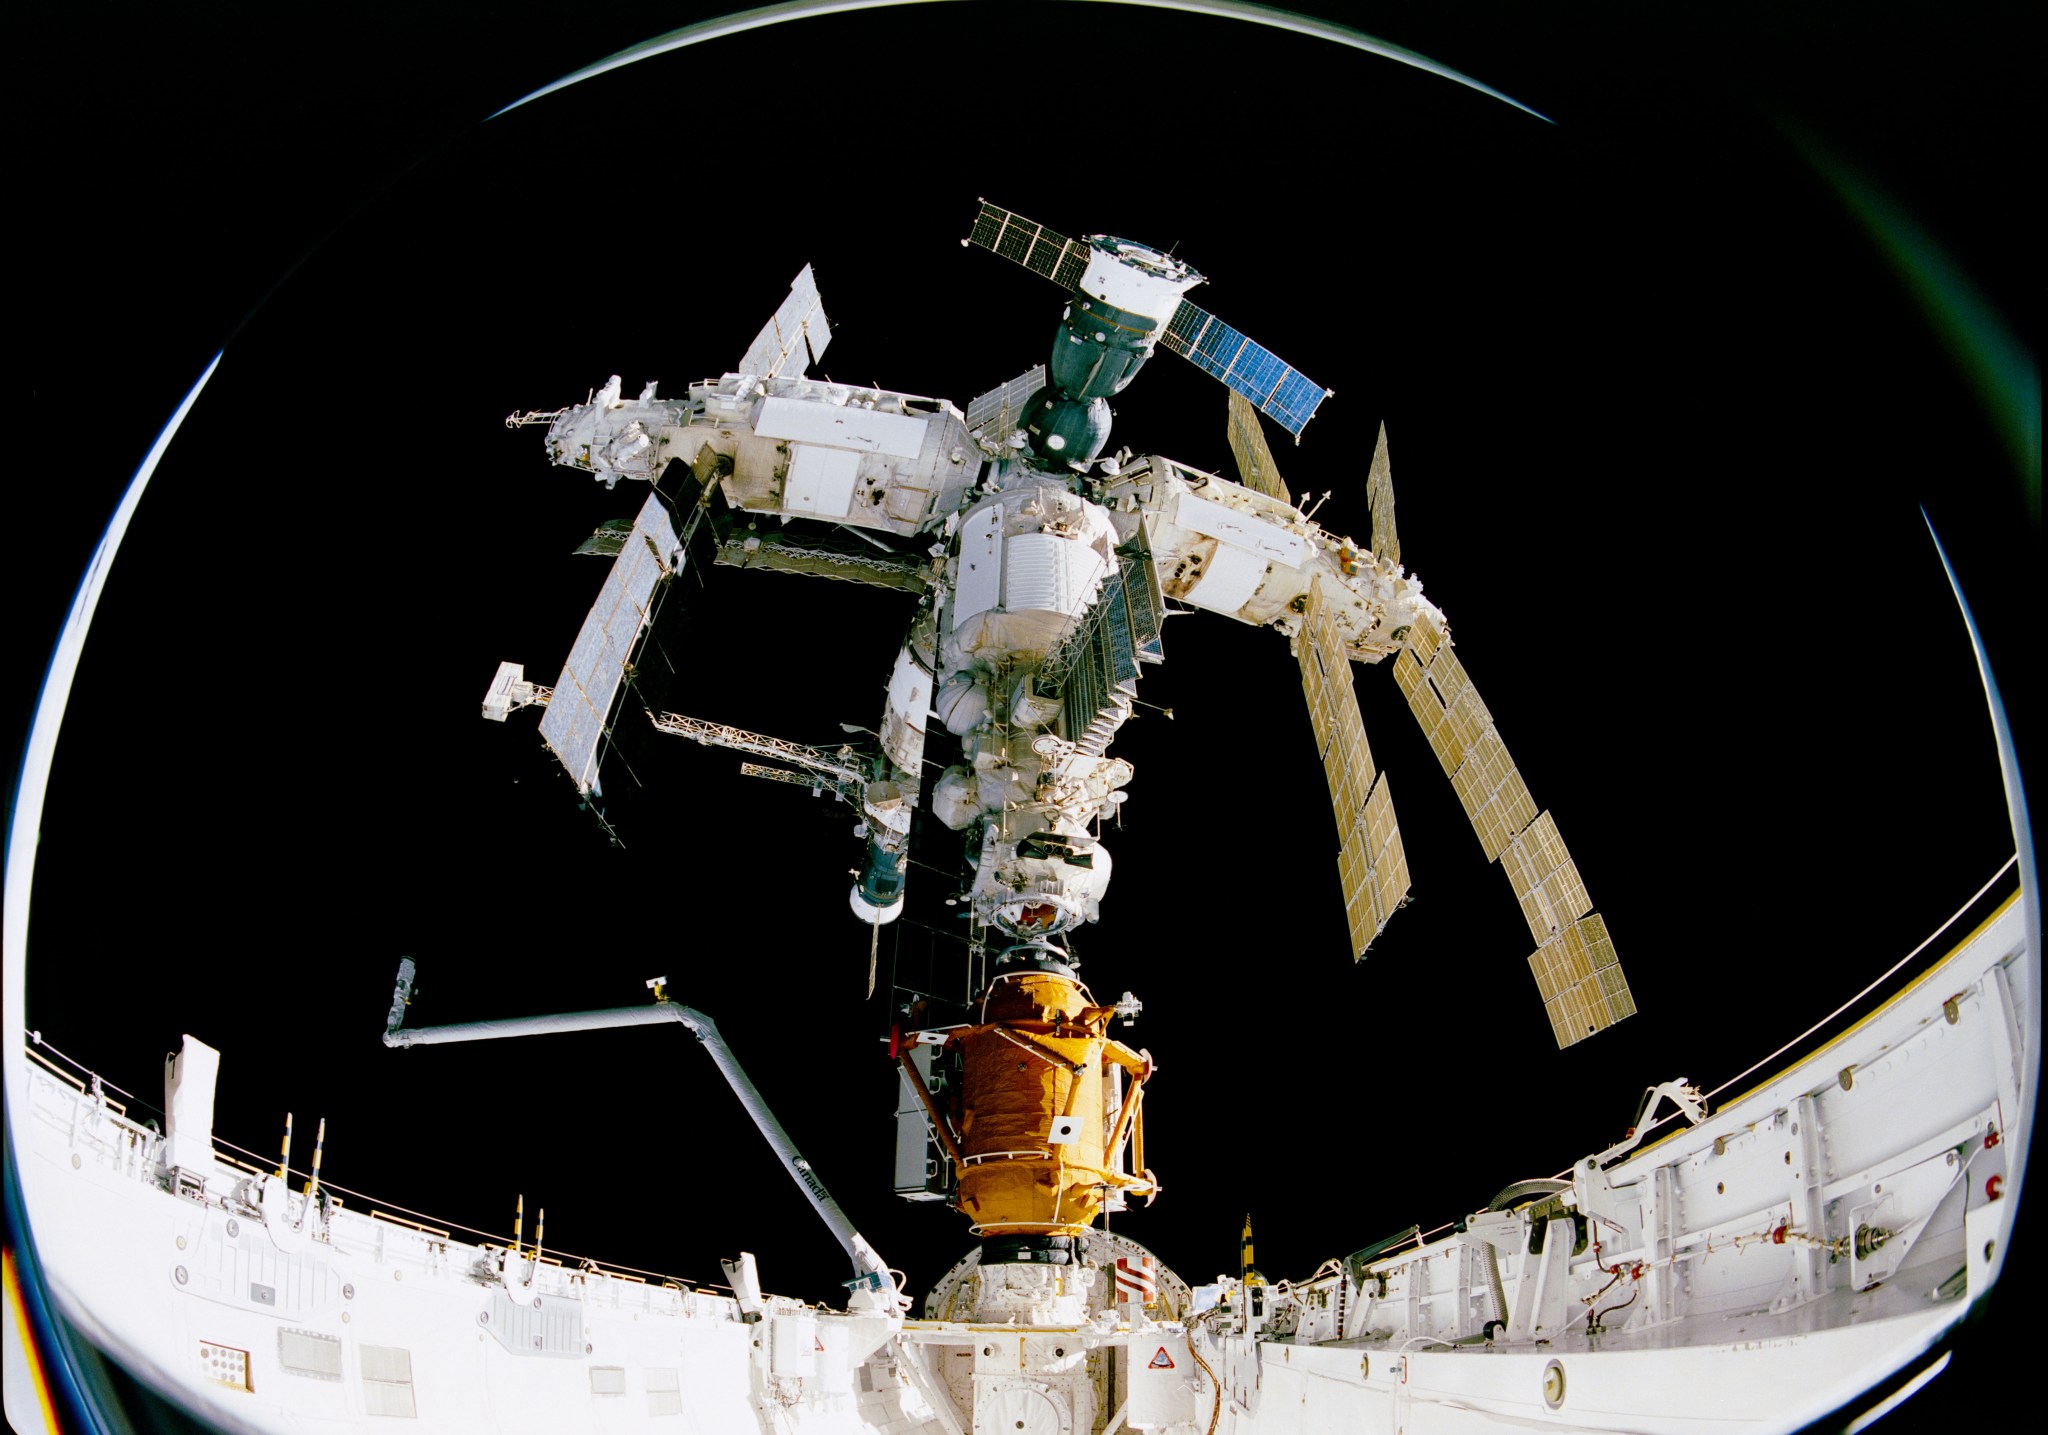 STS-74 crew members used an IMAX camera to document the Space Shuttle Atlantis' rendezvous and docking with the Mir Space Station.